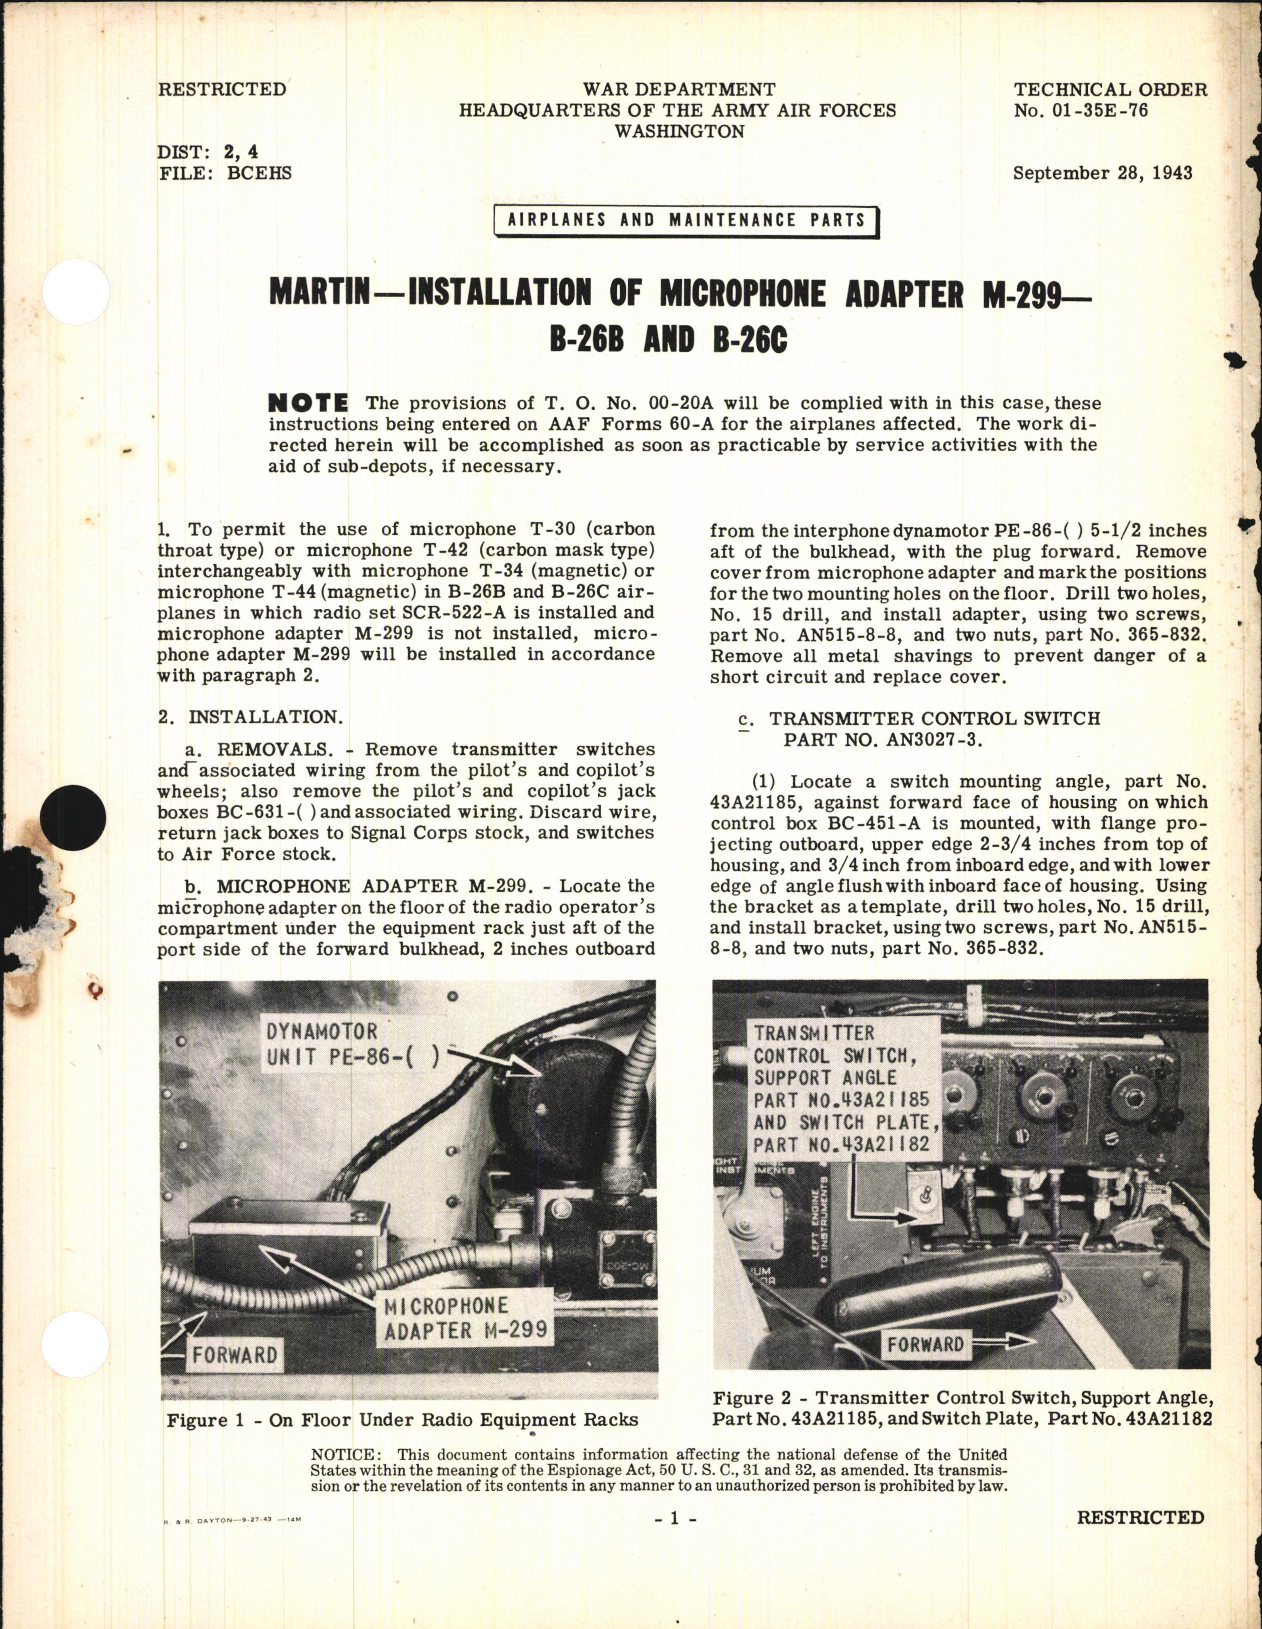 Sample page 1 from AirCorps Library document: Installation of Microphone Adapter M-299 for B-26B and B-26C